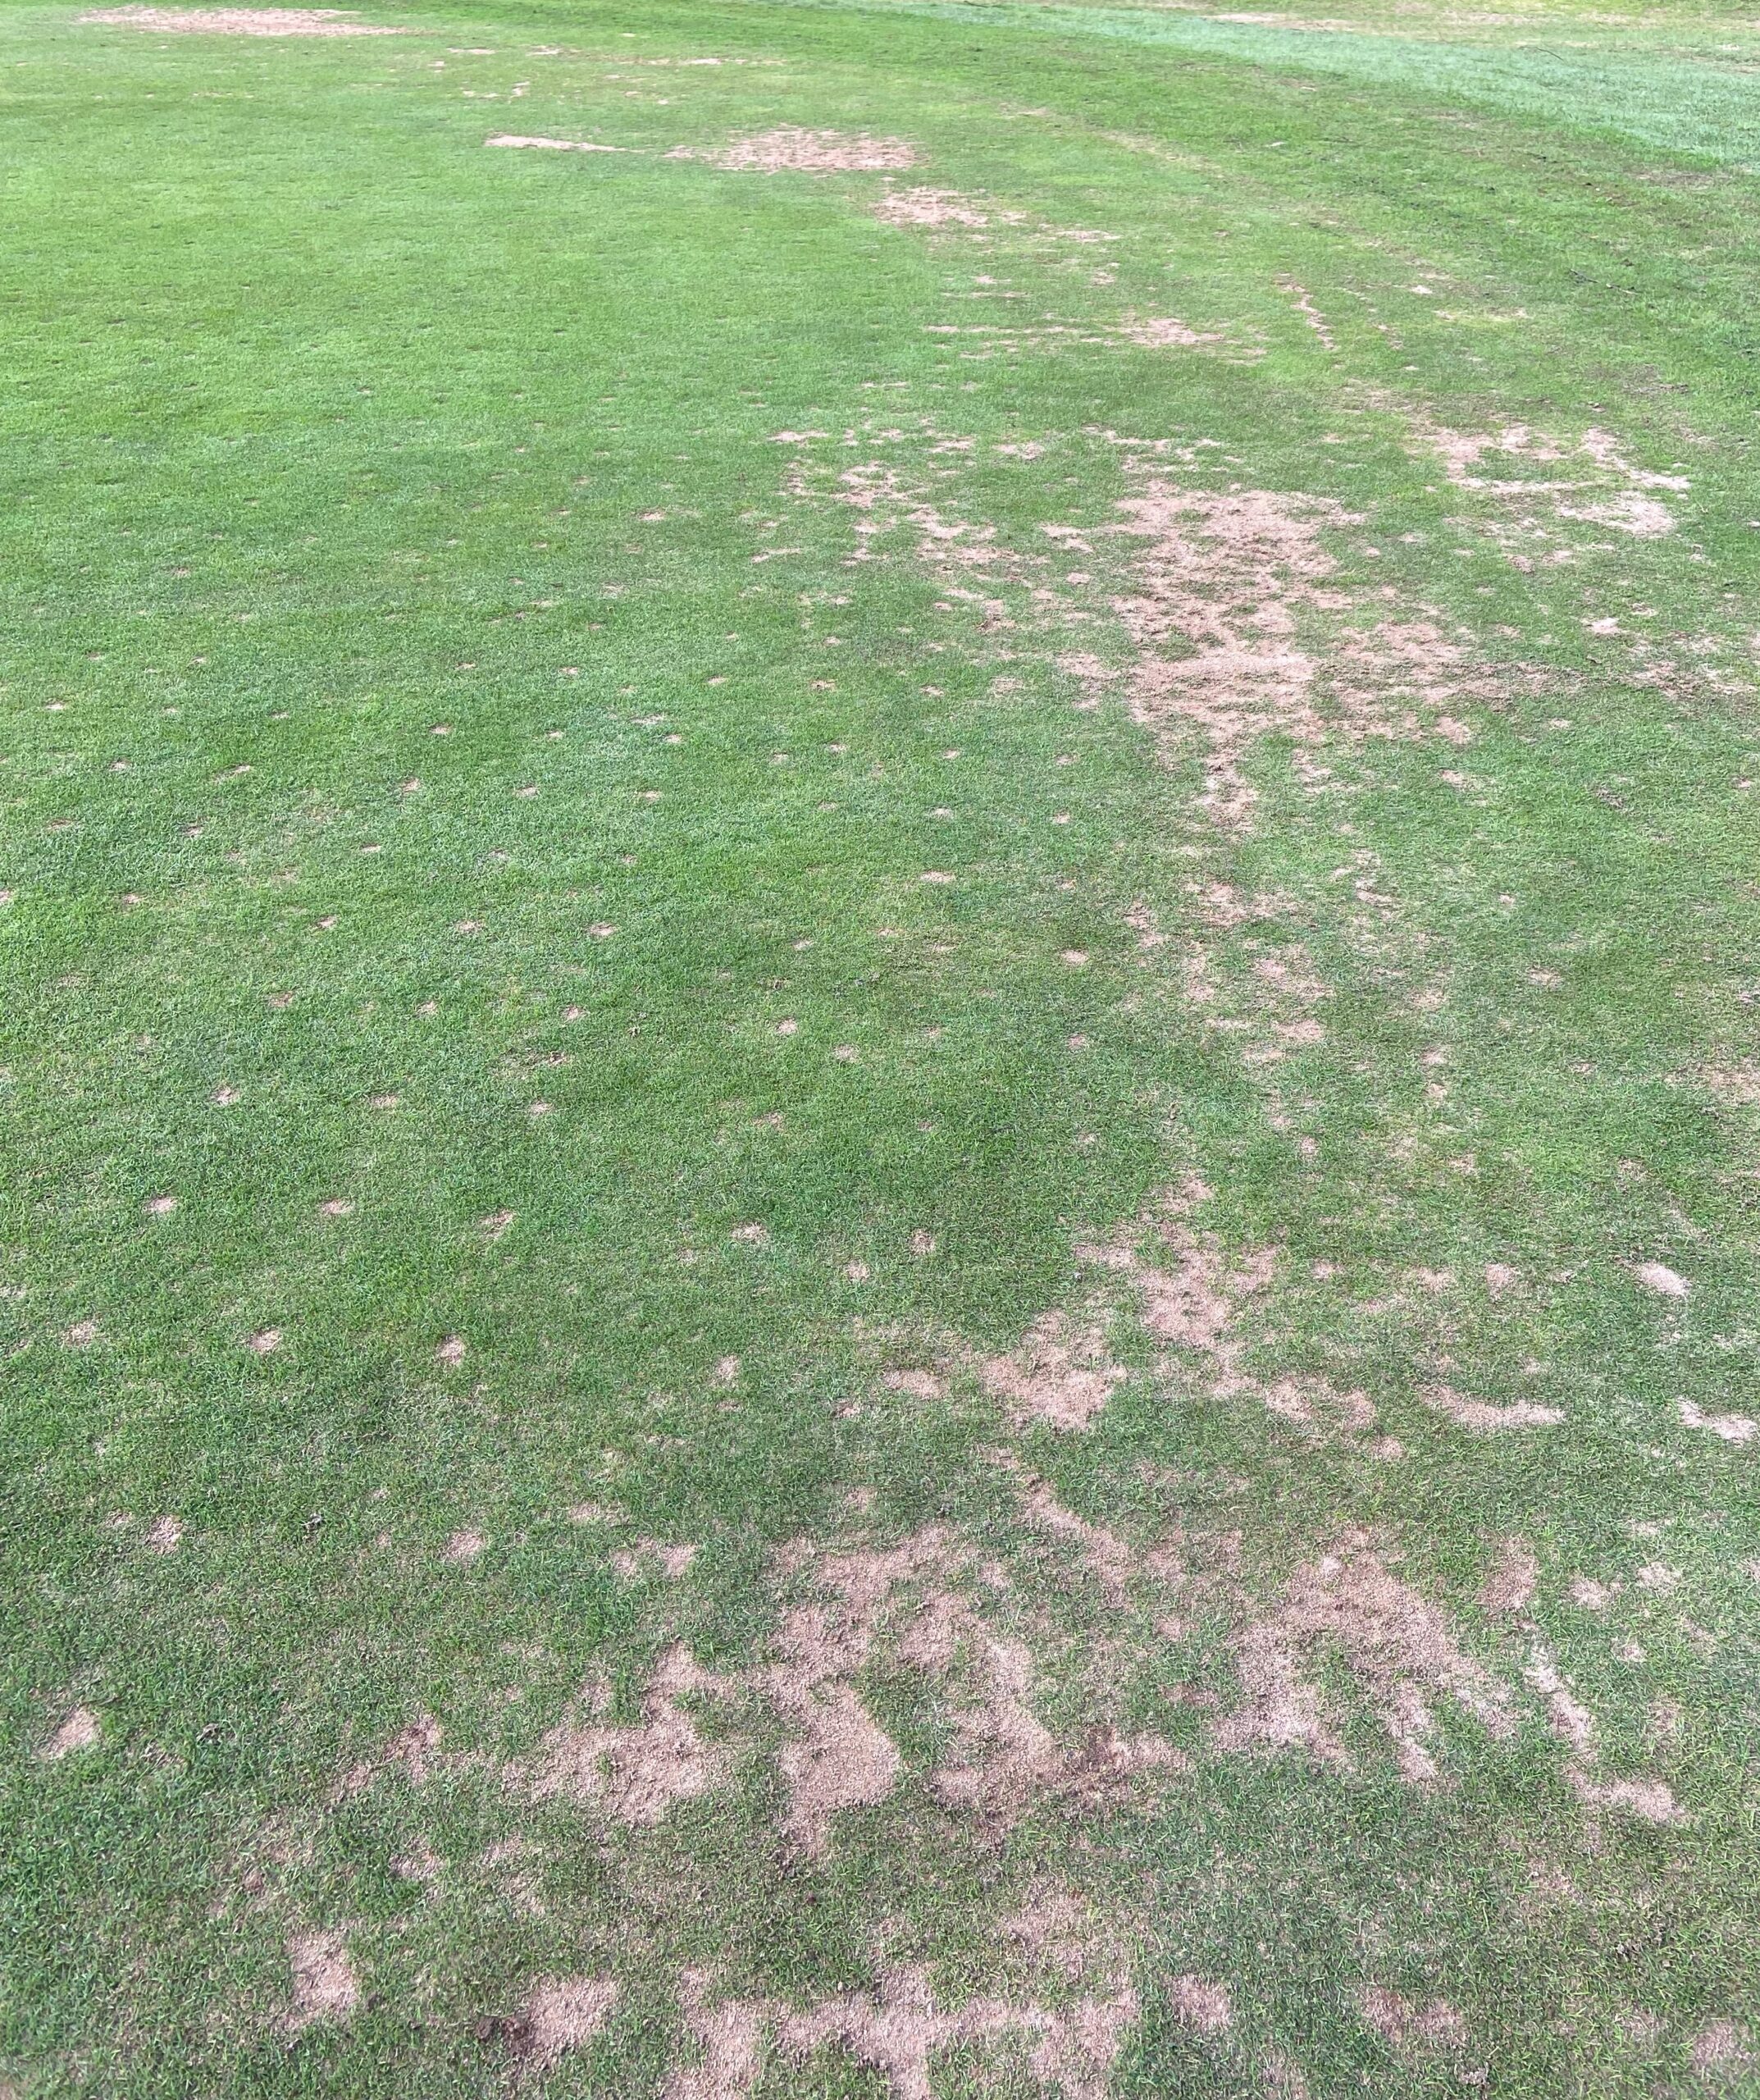 Turf showing signs of wear and tear that can be improved with Maxstim biostimulants